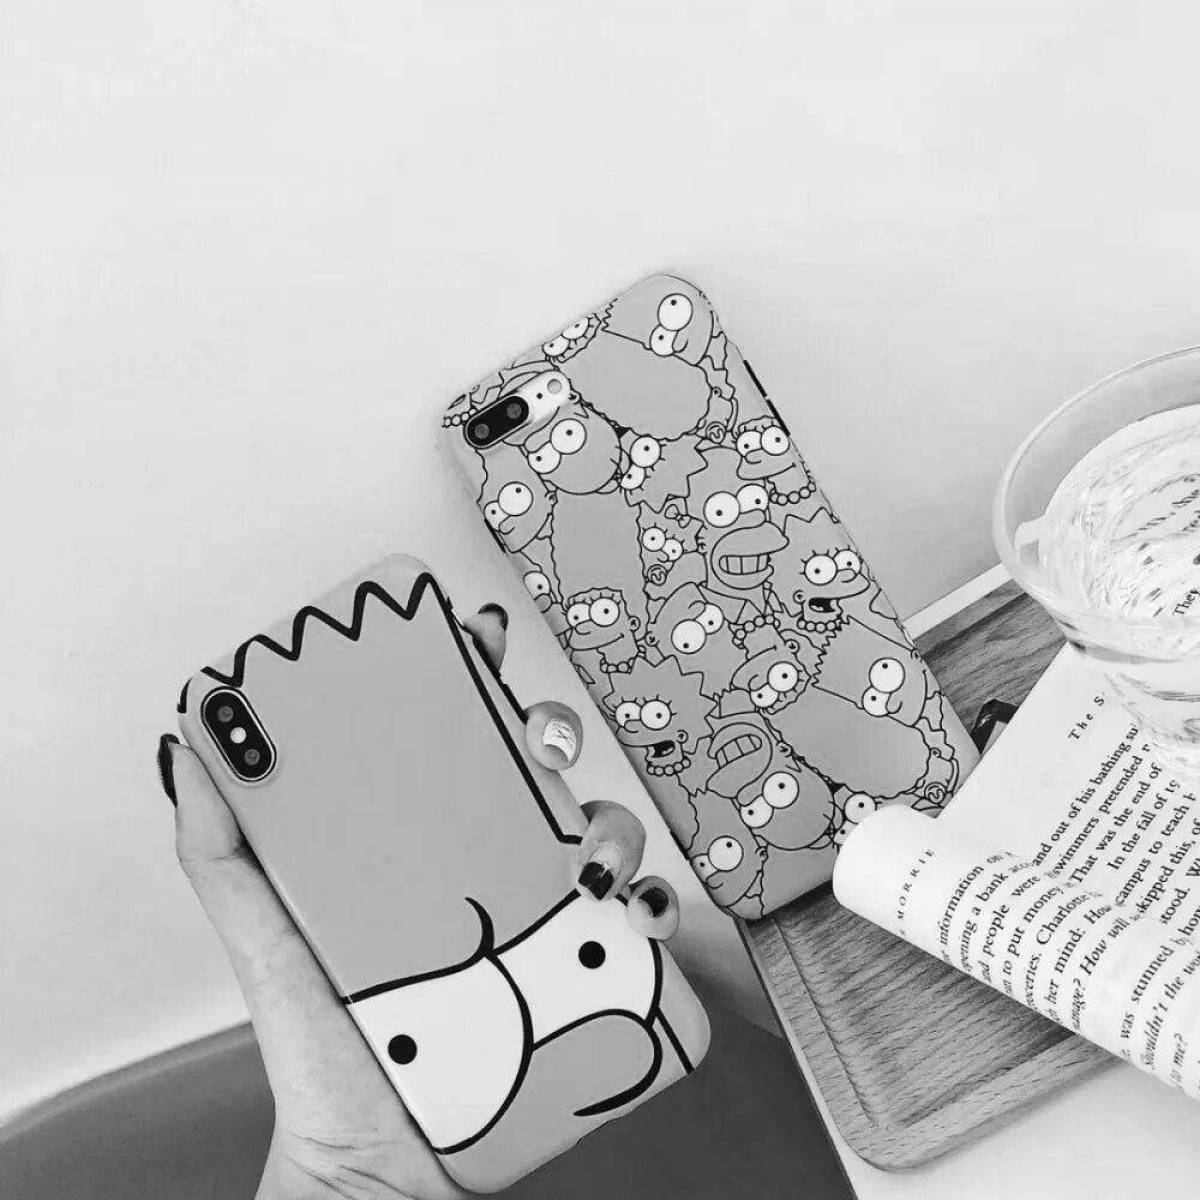 Coloring creative phone cases